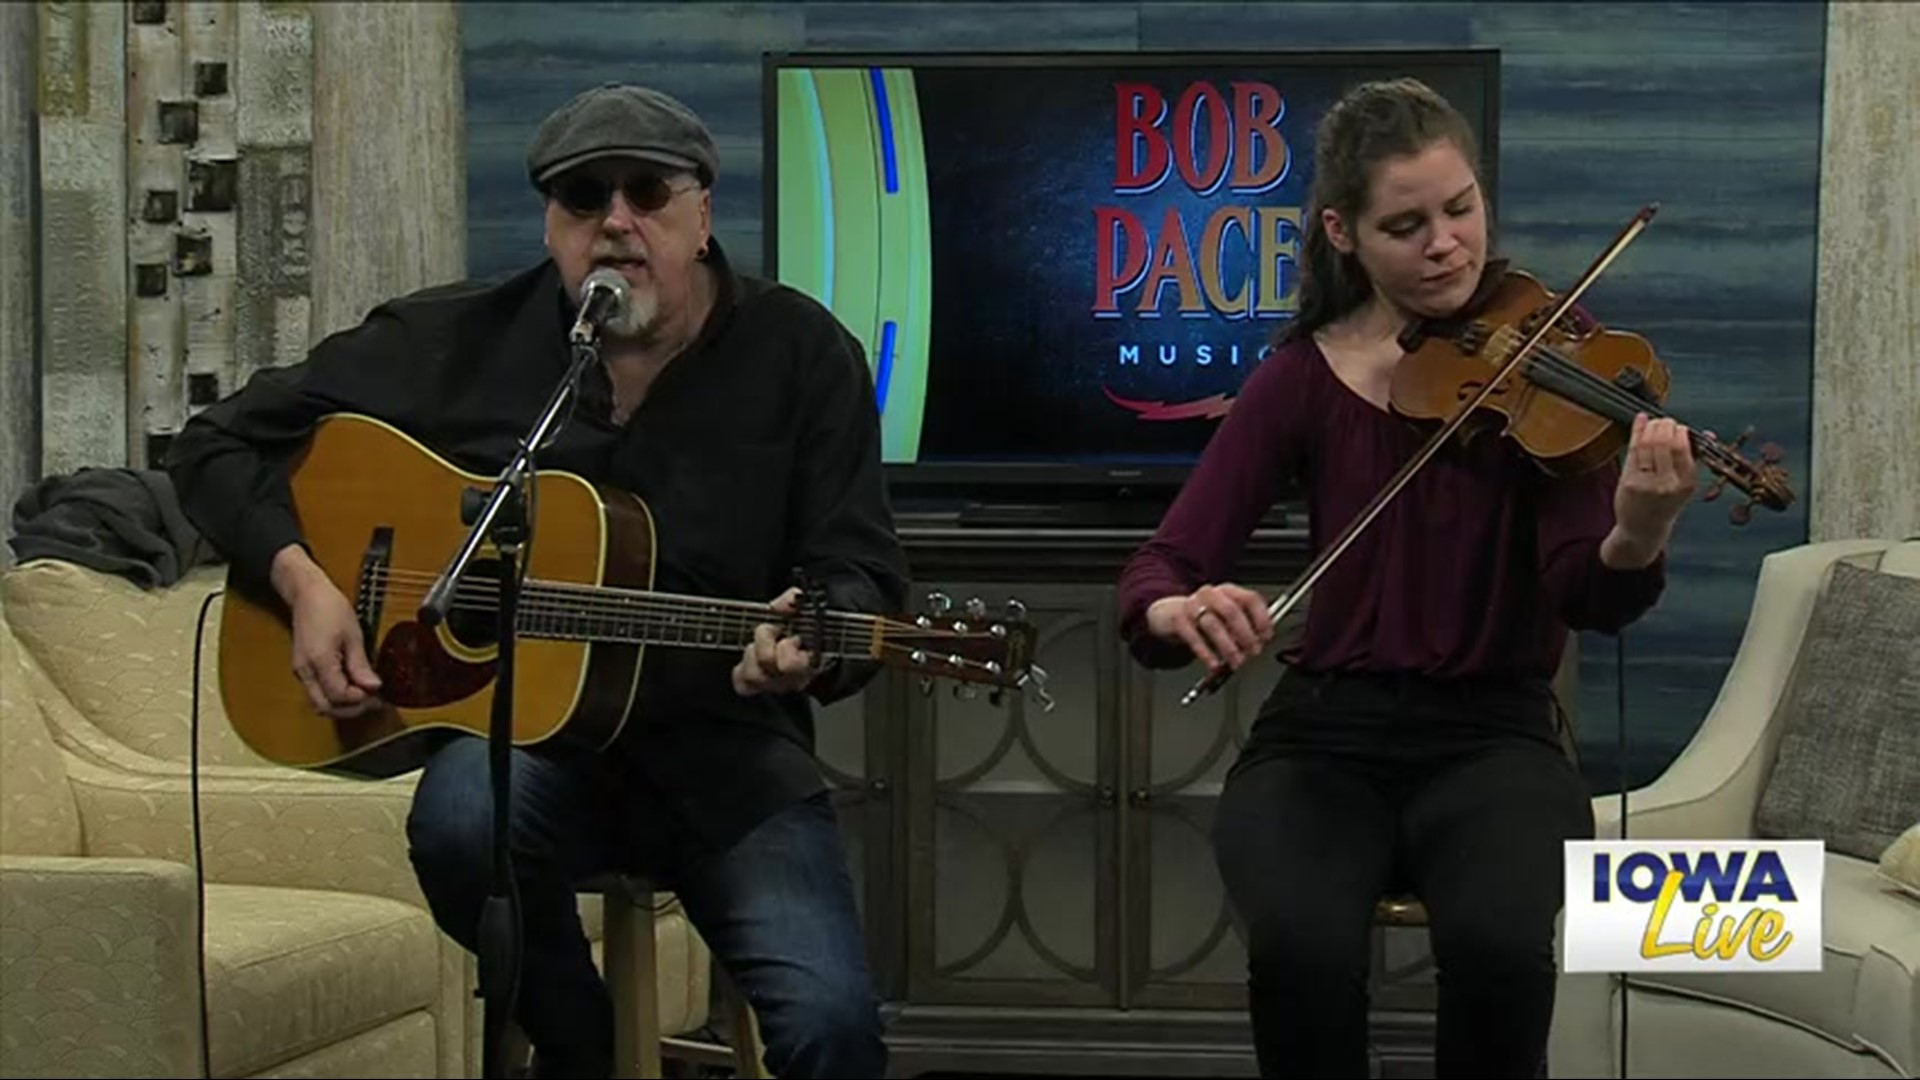 Bob Pace and Kathryn Severing Fox perform on Iowa Live